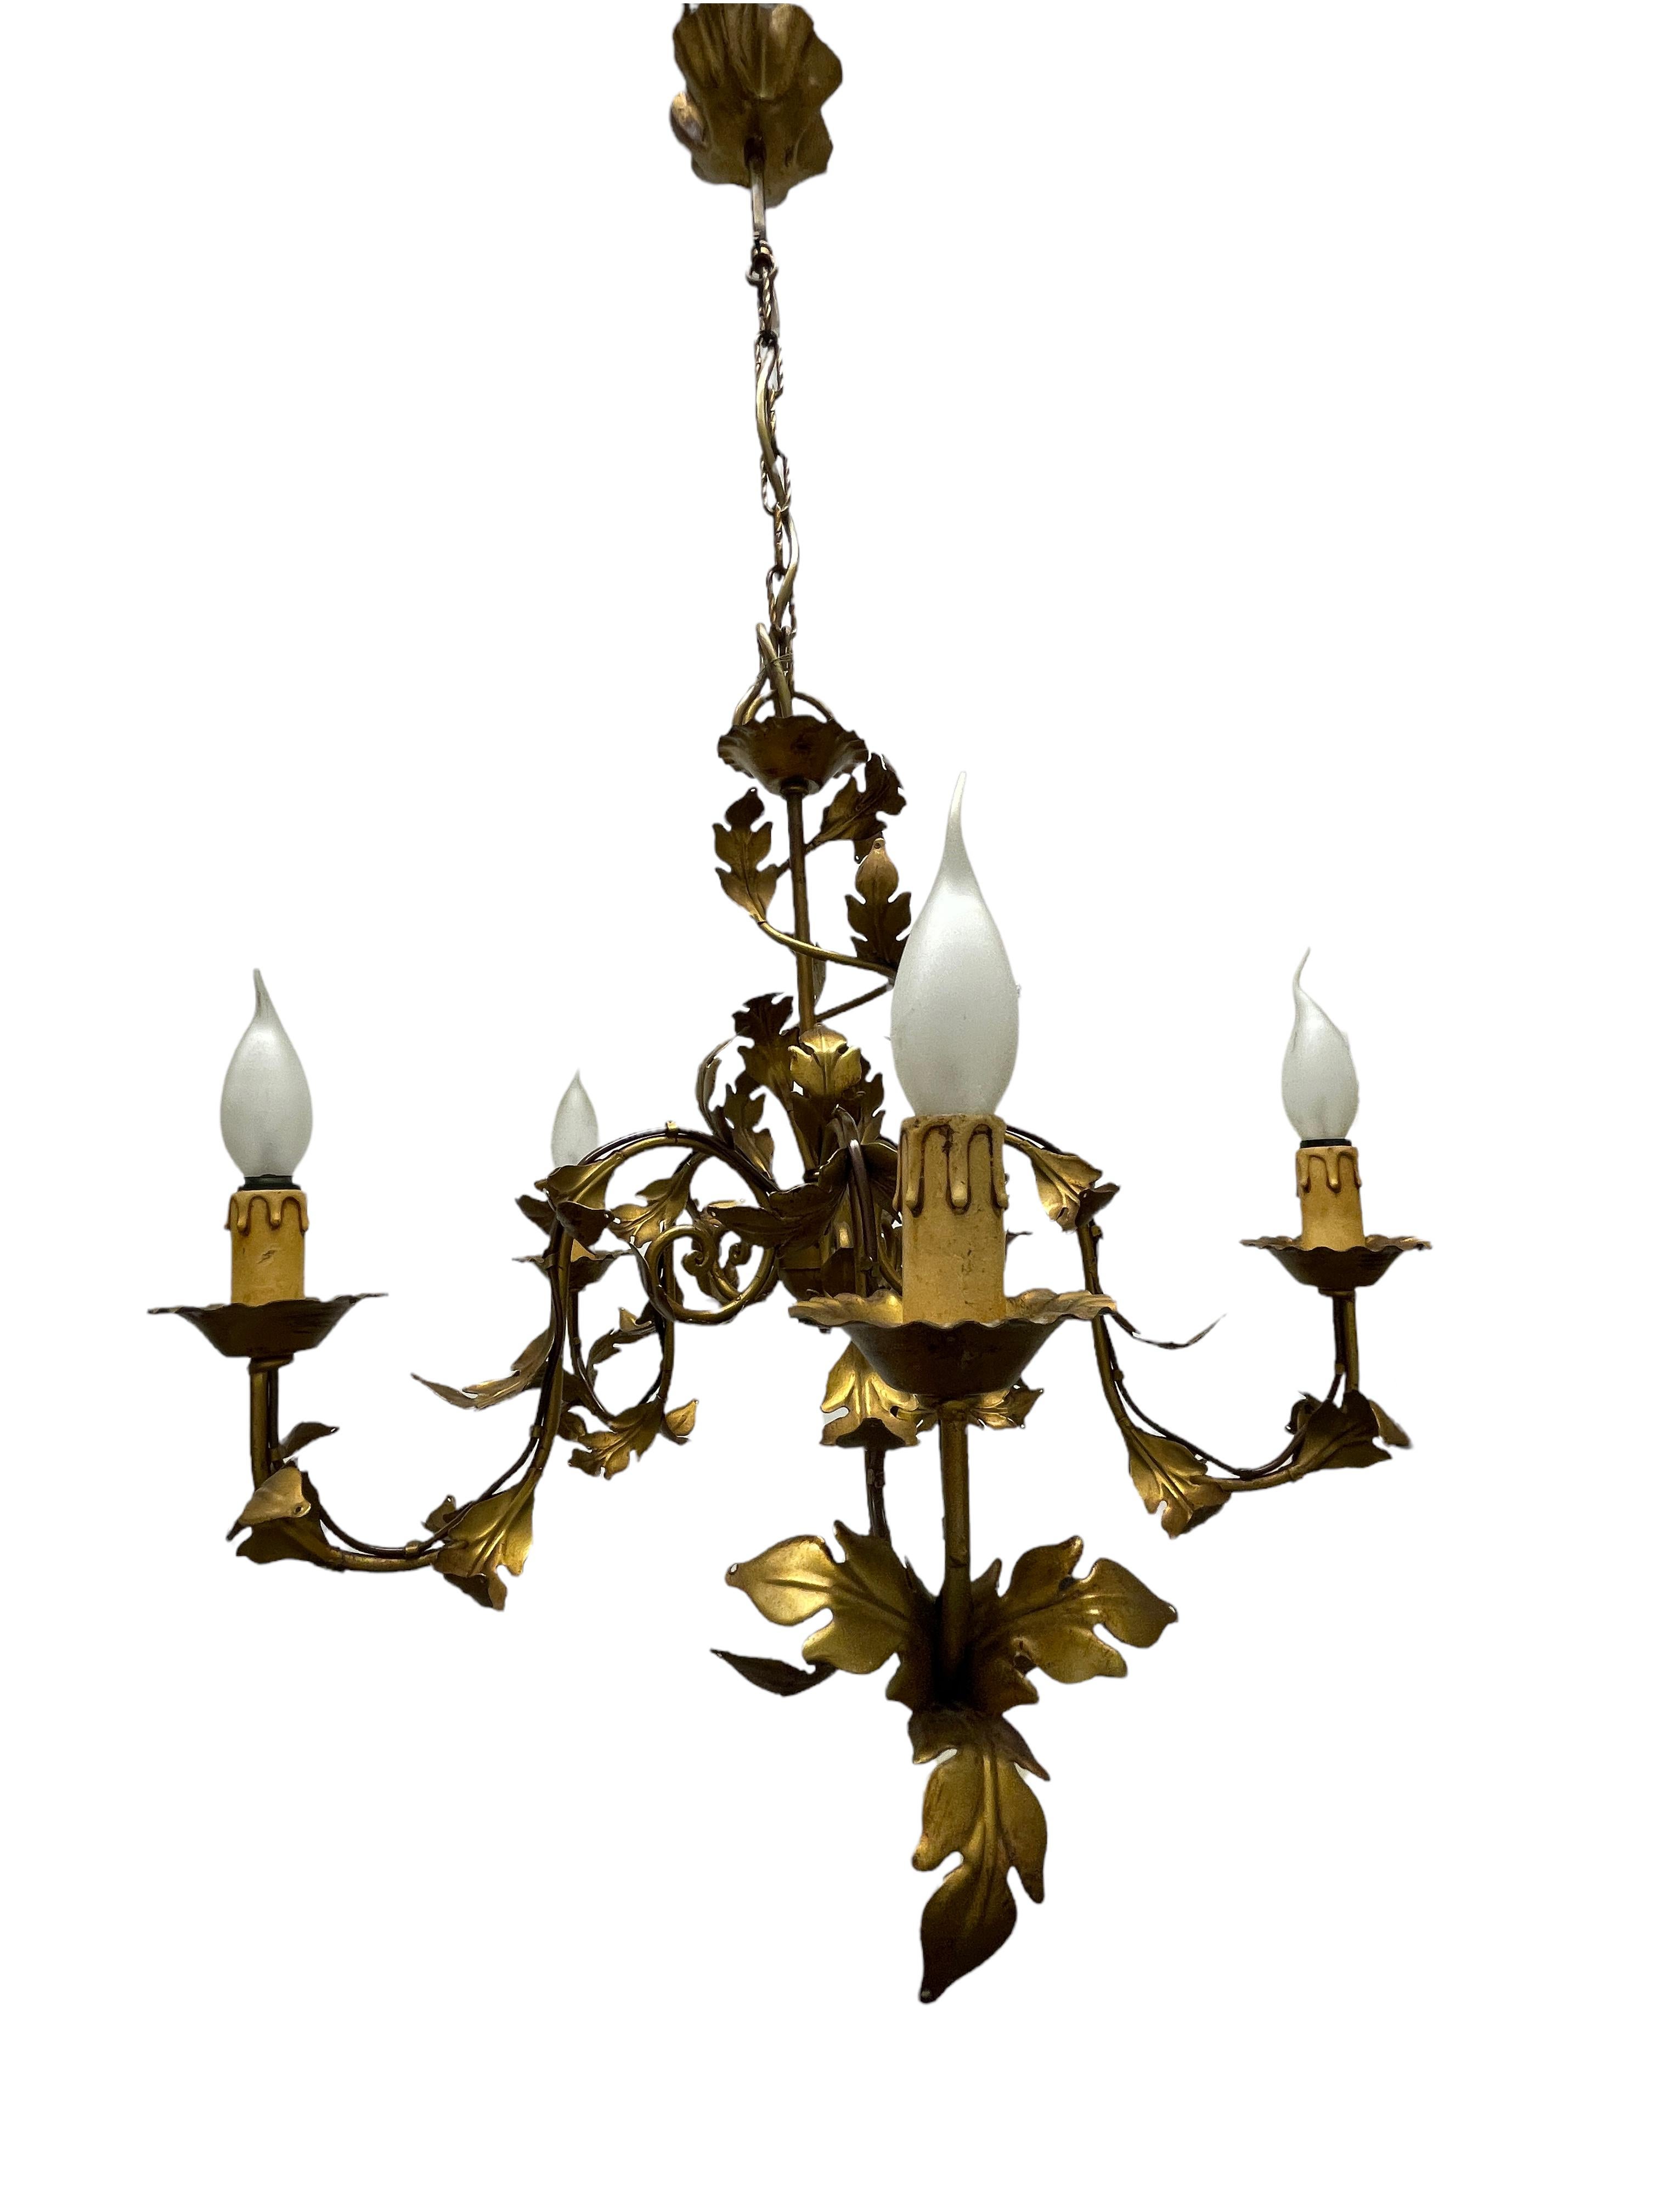 Beautiful Leaf Five-Light Tole Hollywood Regency Chandelier Gilded, Italy, 1960s For Sale 2